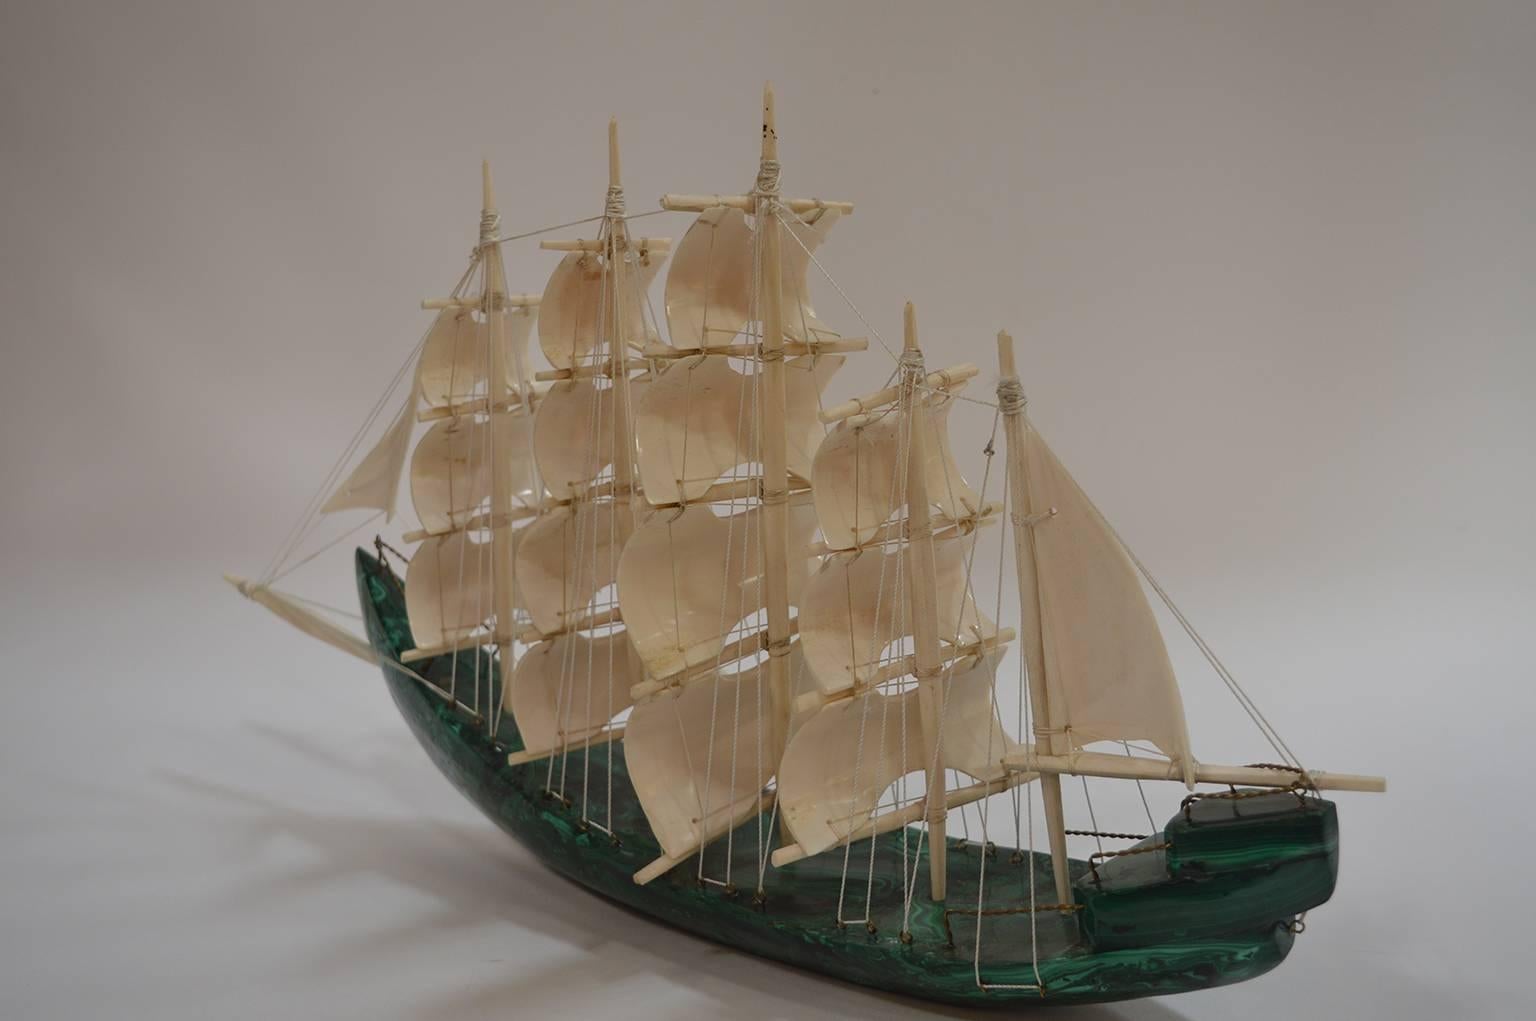 Malachite sail boat with carved bone detail sails.